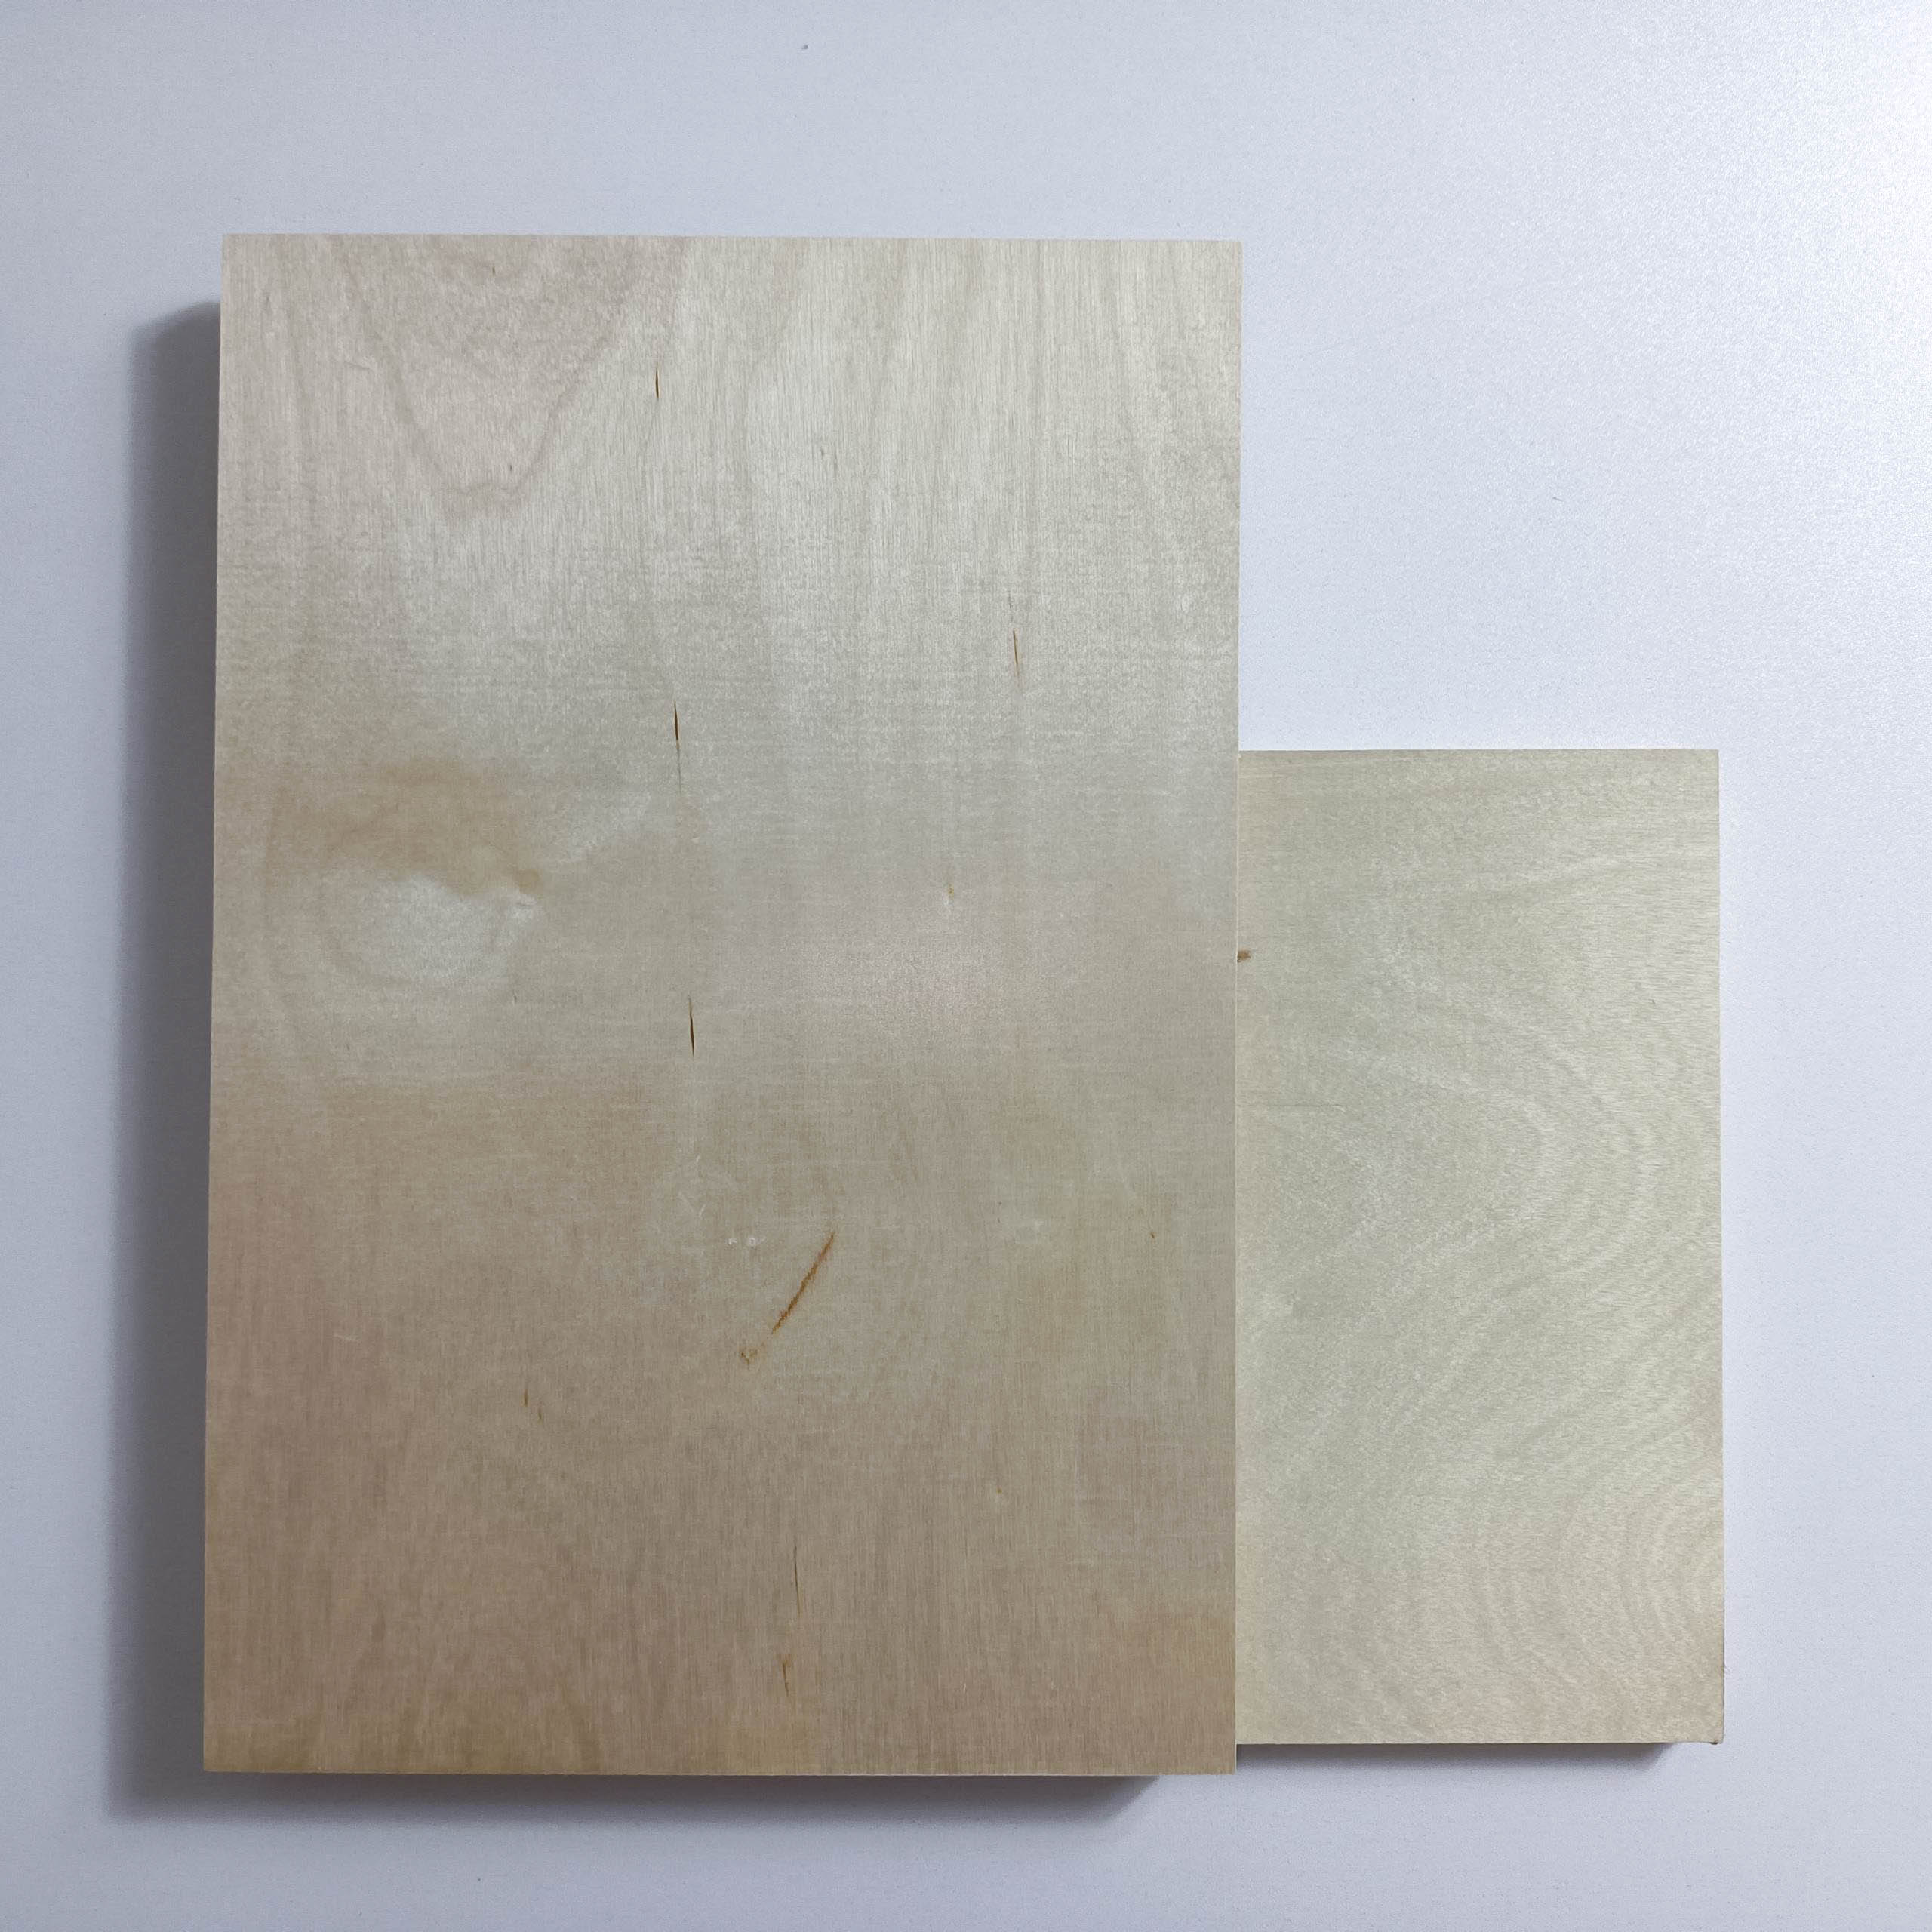 About eoncred plywood